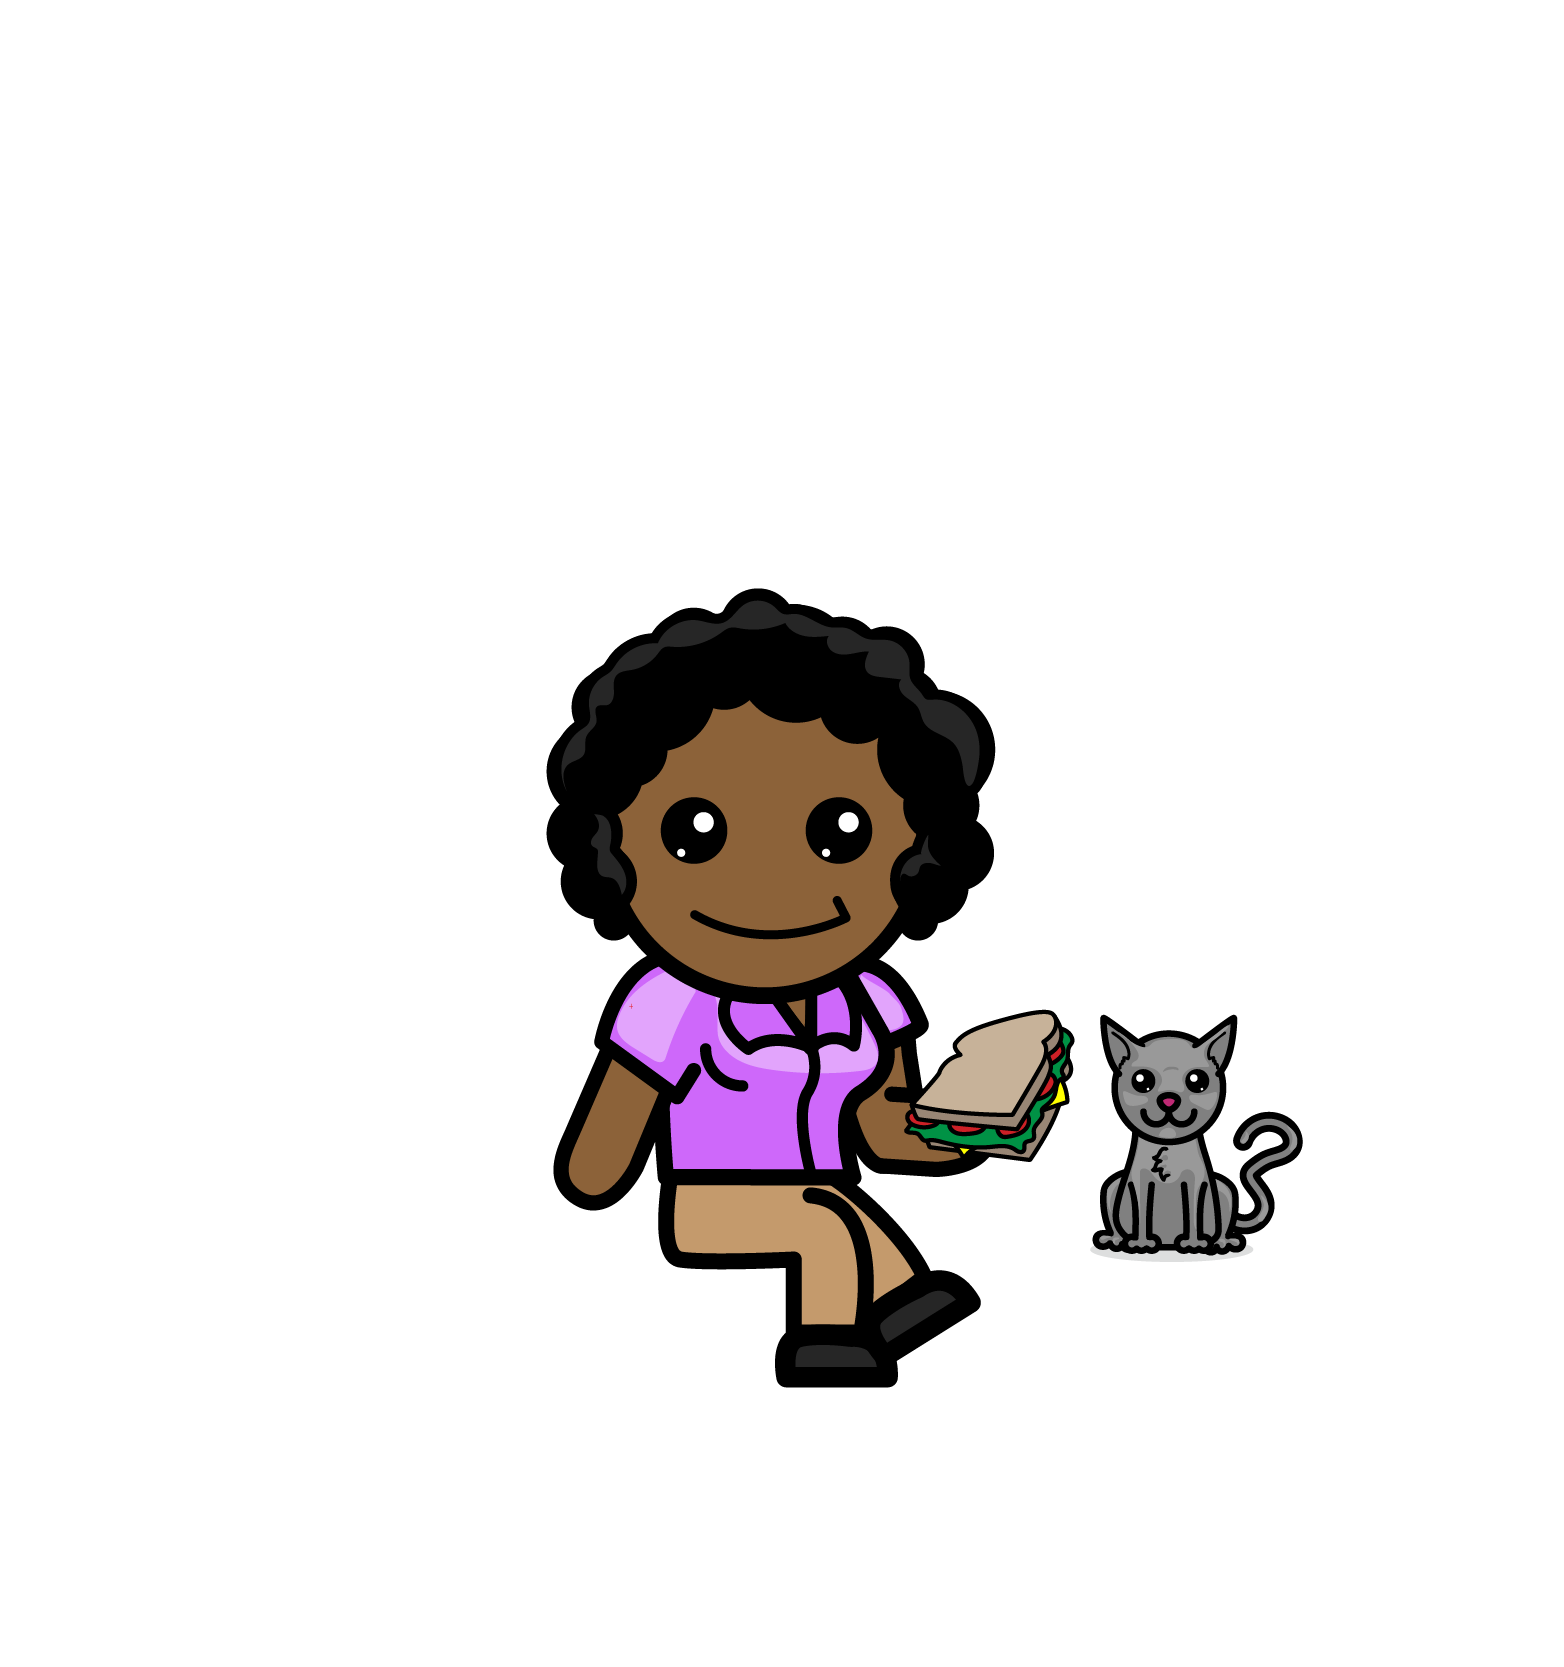 Sandra and her cat enjoying some lunch together